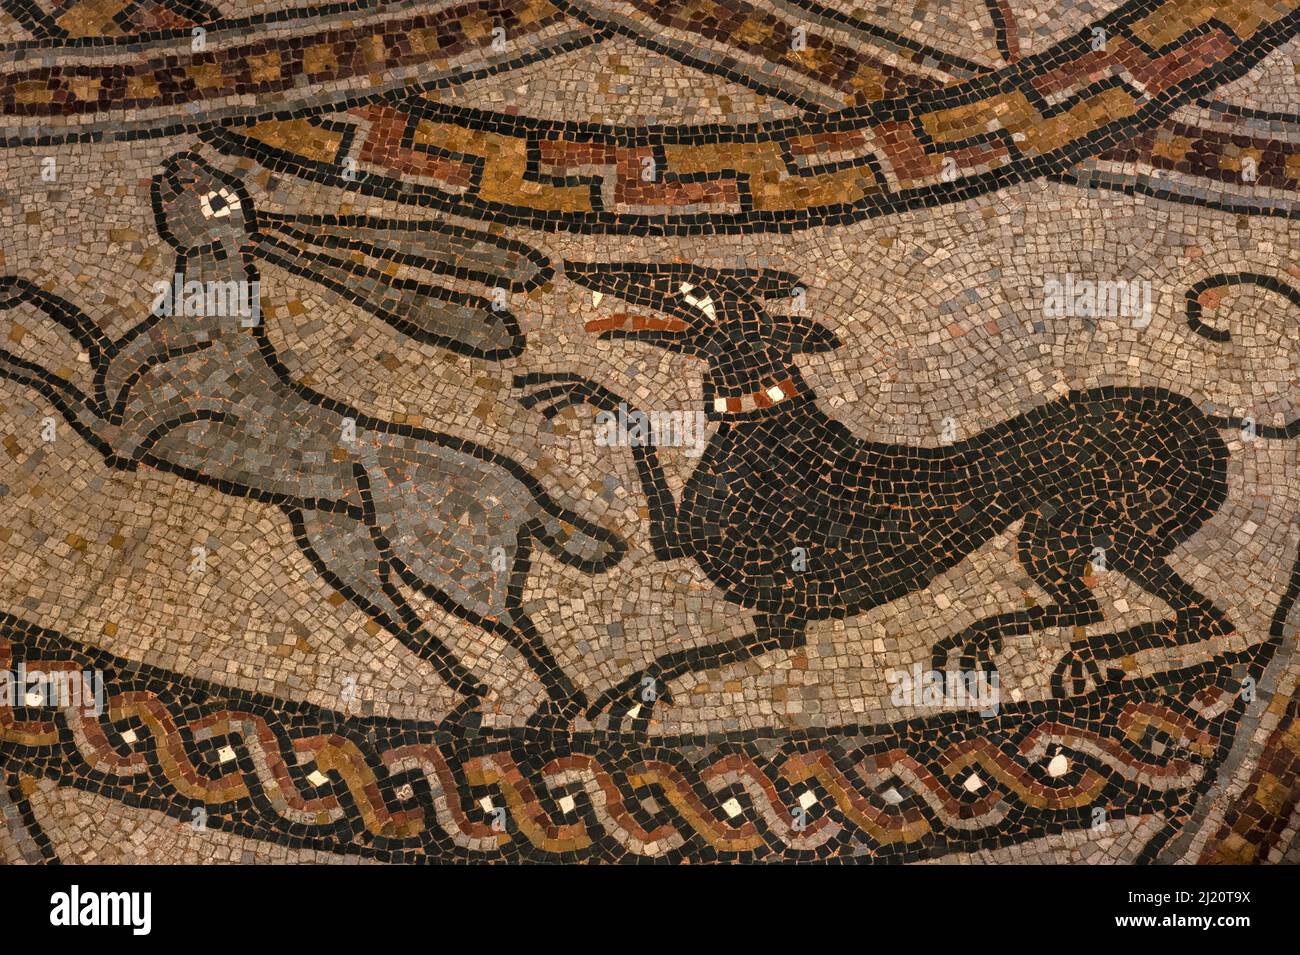 Black dog chases a leaping hare.  Detail of medieval mosaic in restored late-1000s or early 1100s pavement in former Benedictine abbey church at Sorde l'Abbaye, Landes, Nouvelle-Aquitaine, France. Stock Photo